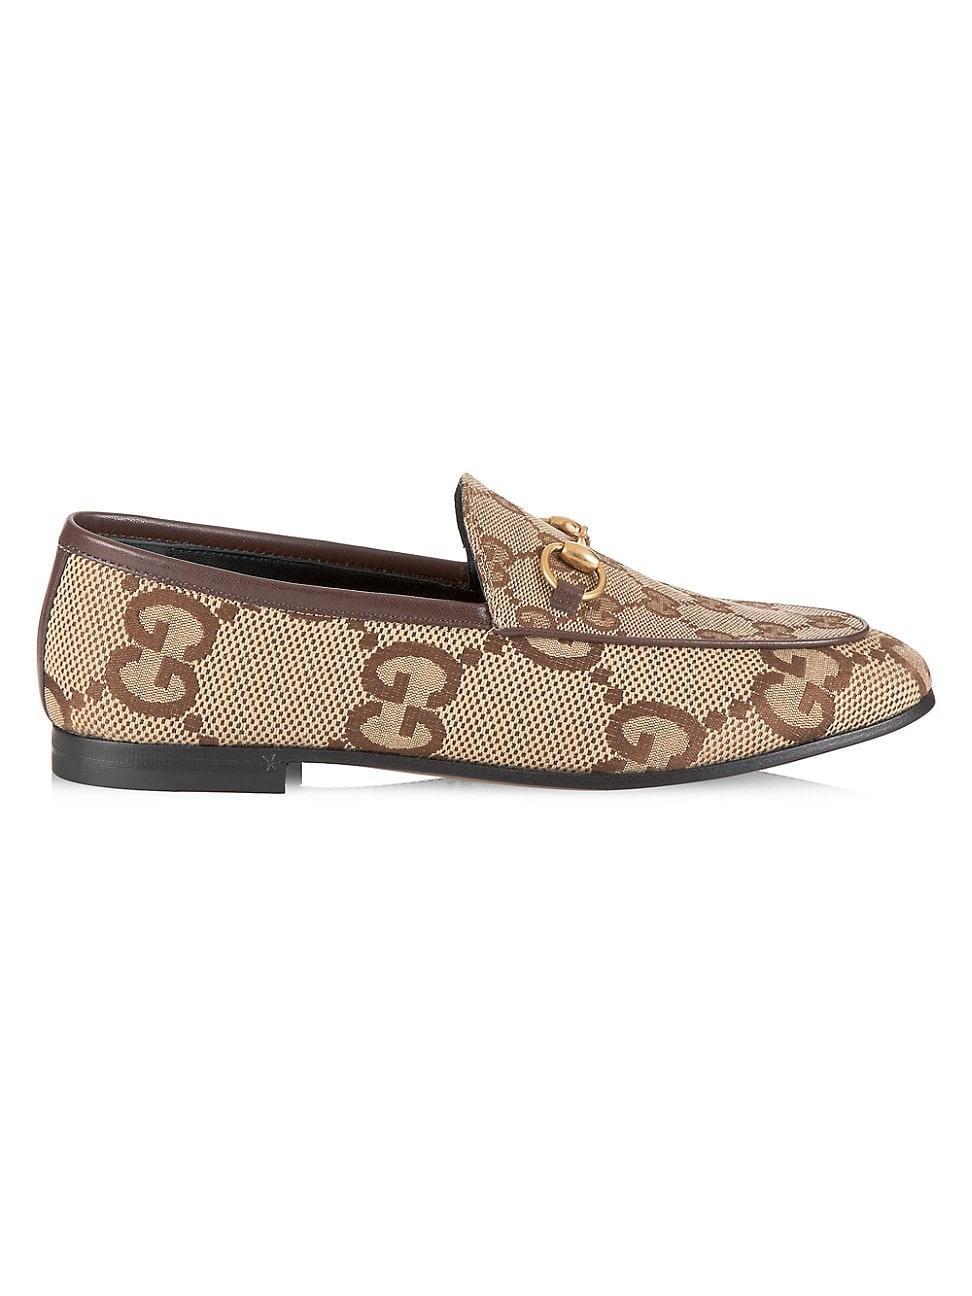 Womens Maxi GG Jordaan Loafers Product Image